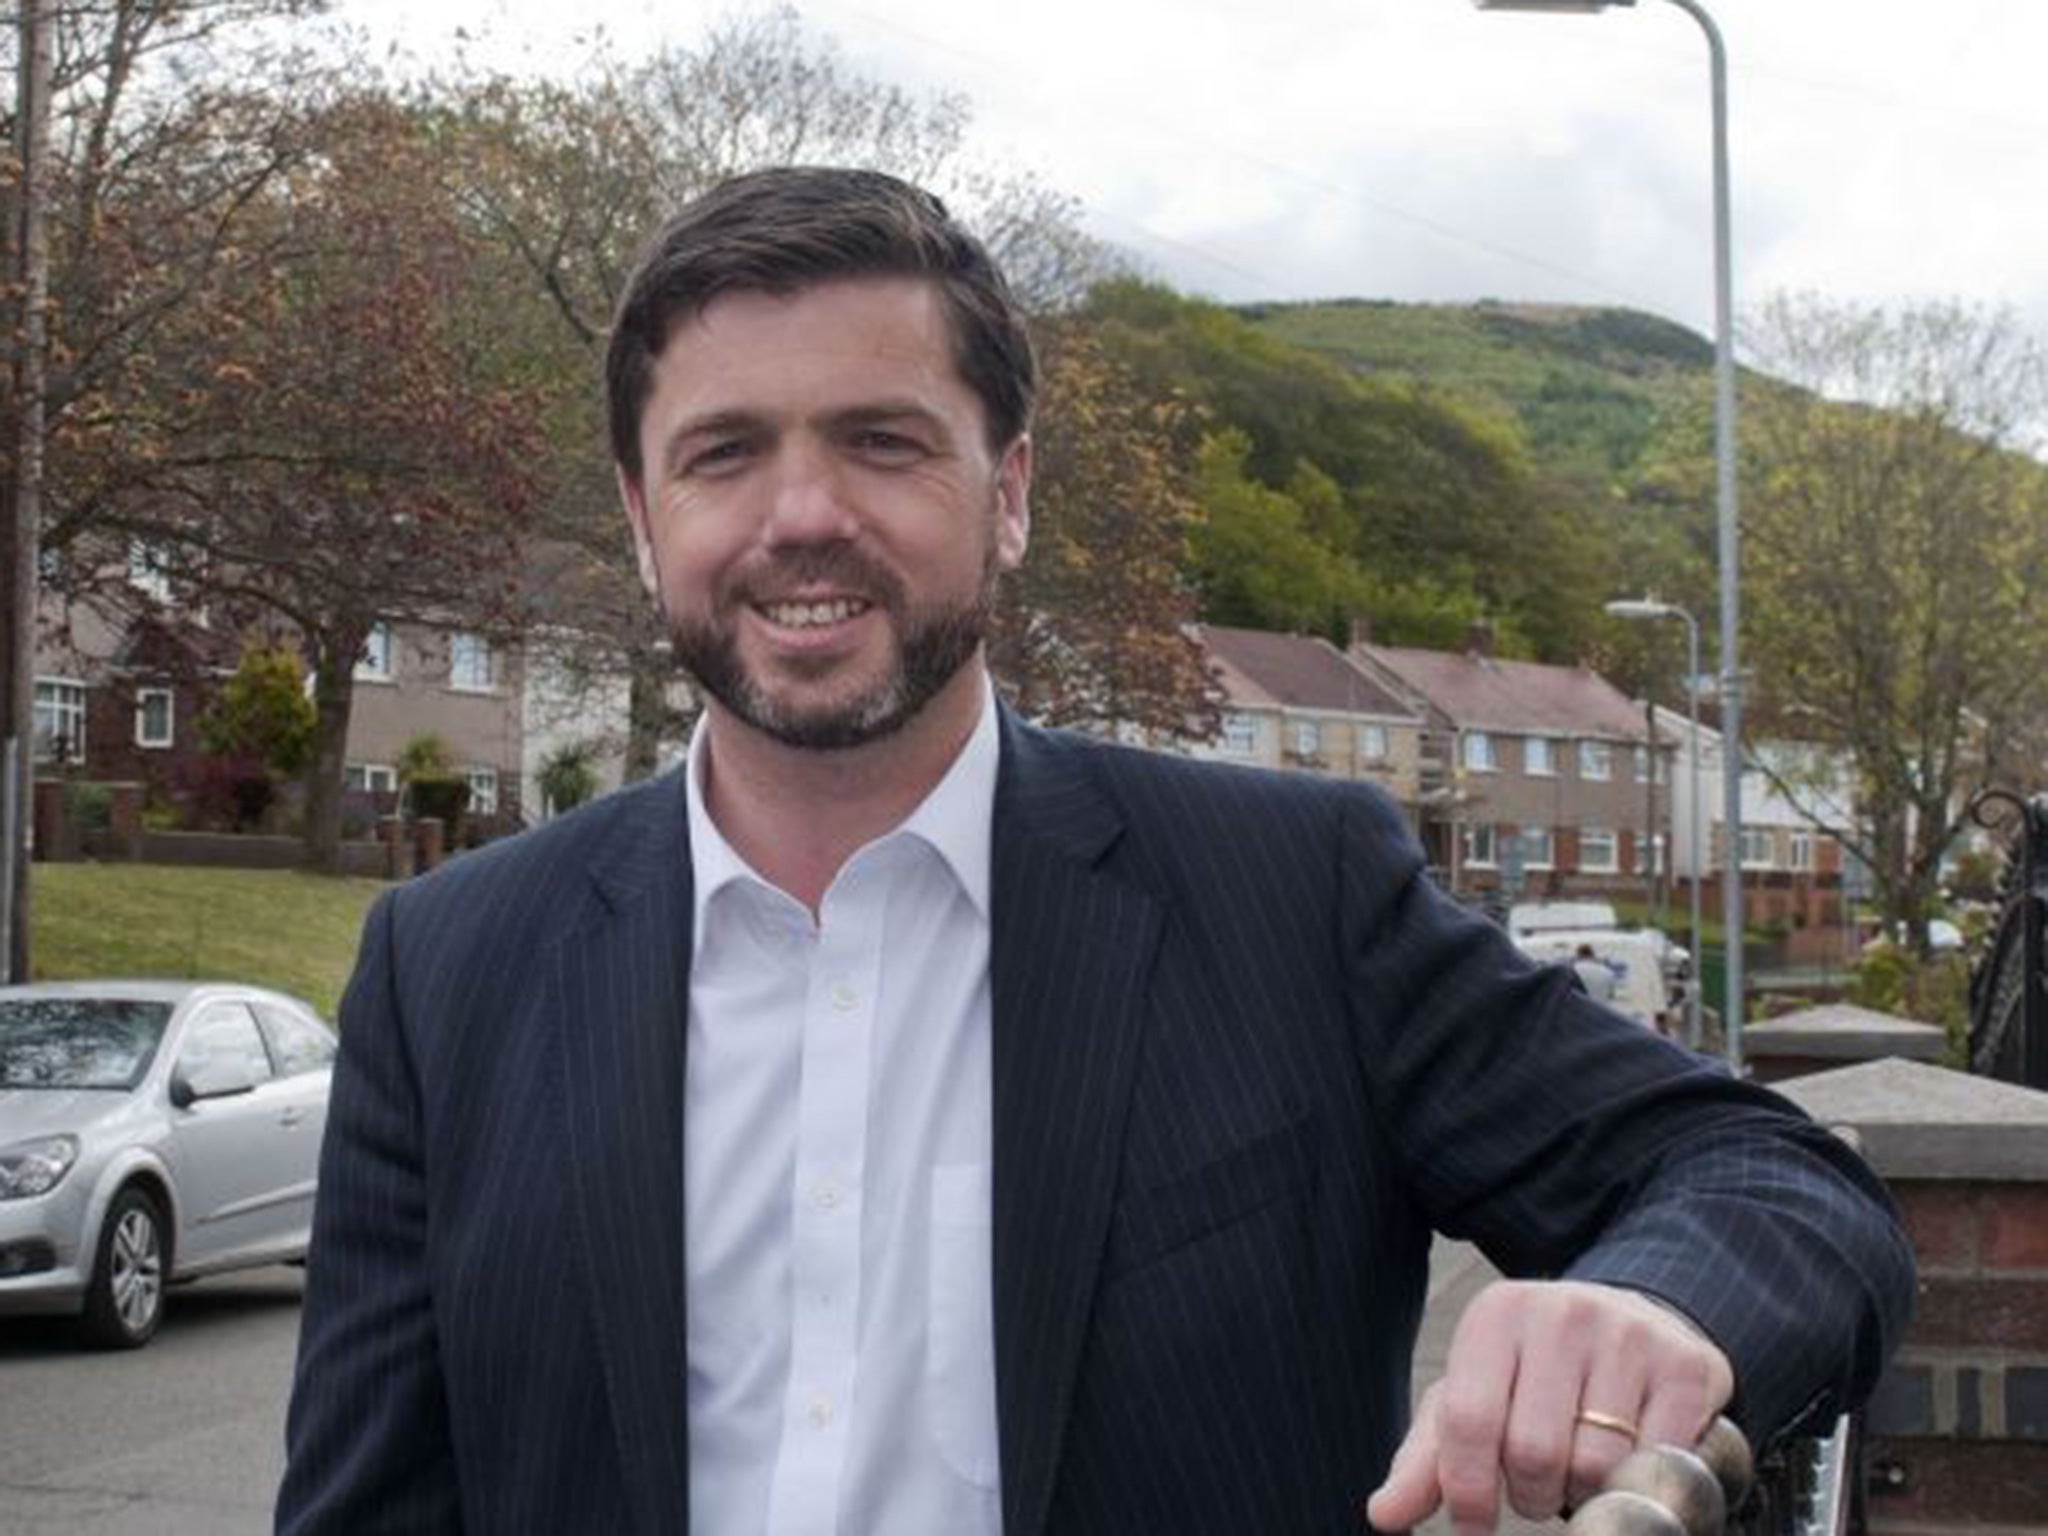 Stephen Crabb has replaced Iain Duncan Smith at the helm of the Department for Work and Pensions